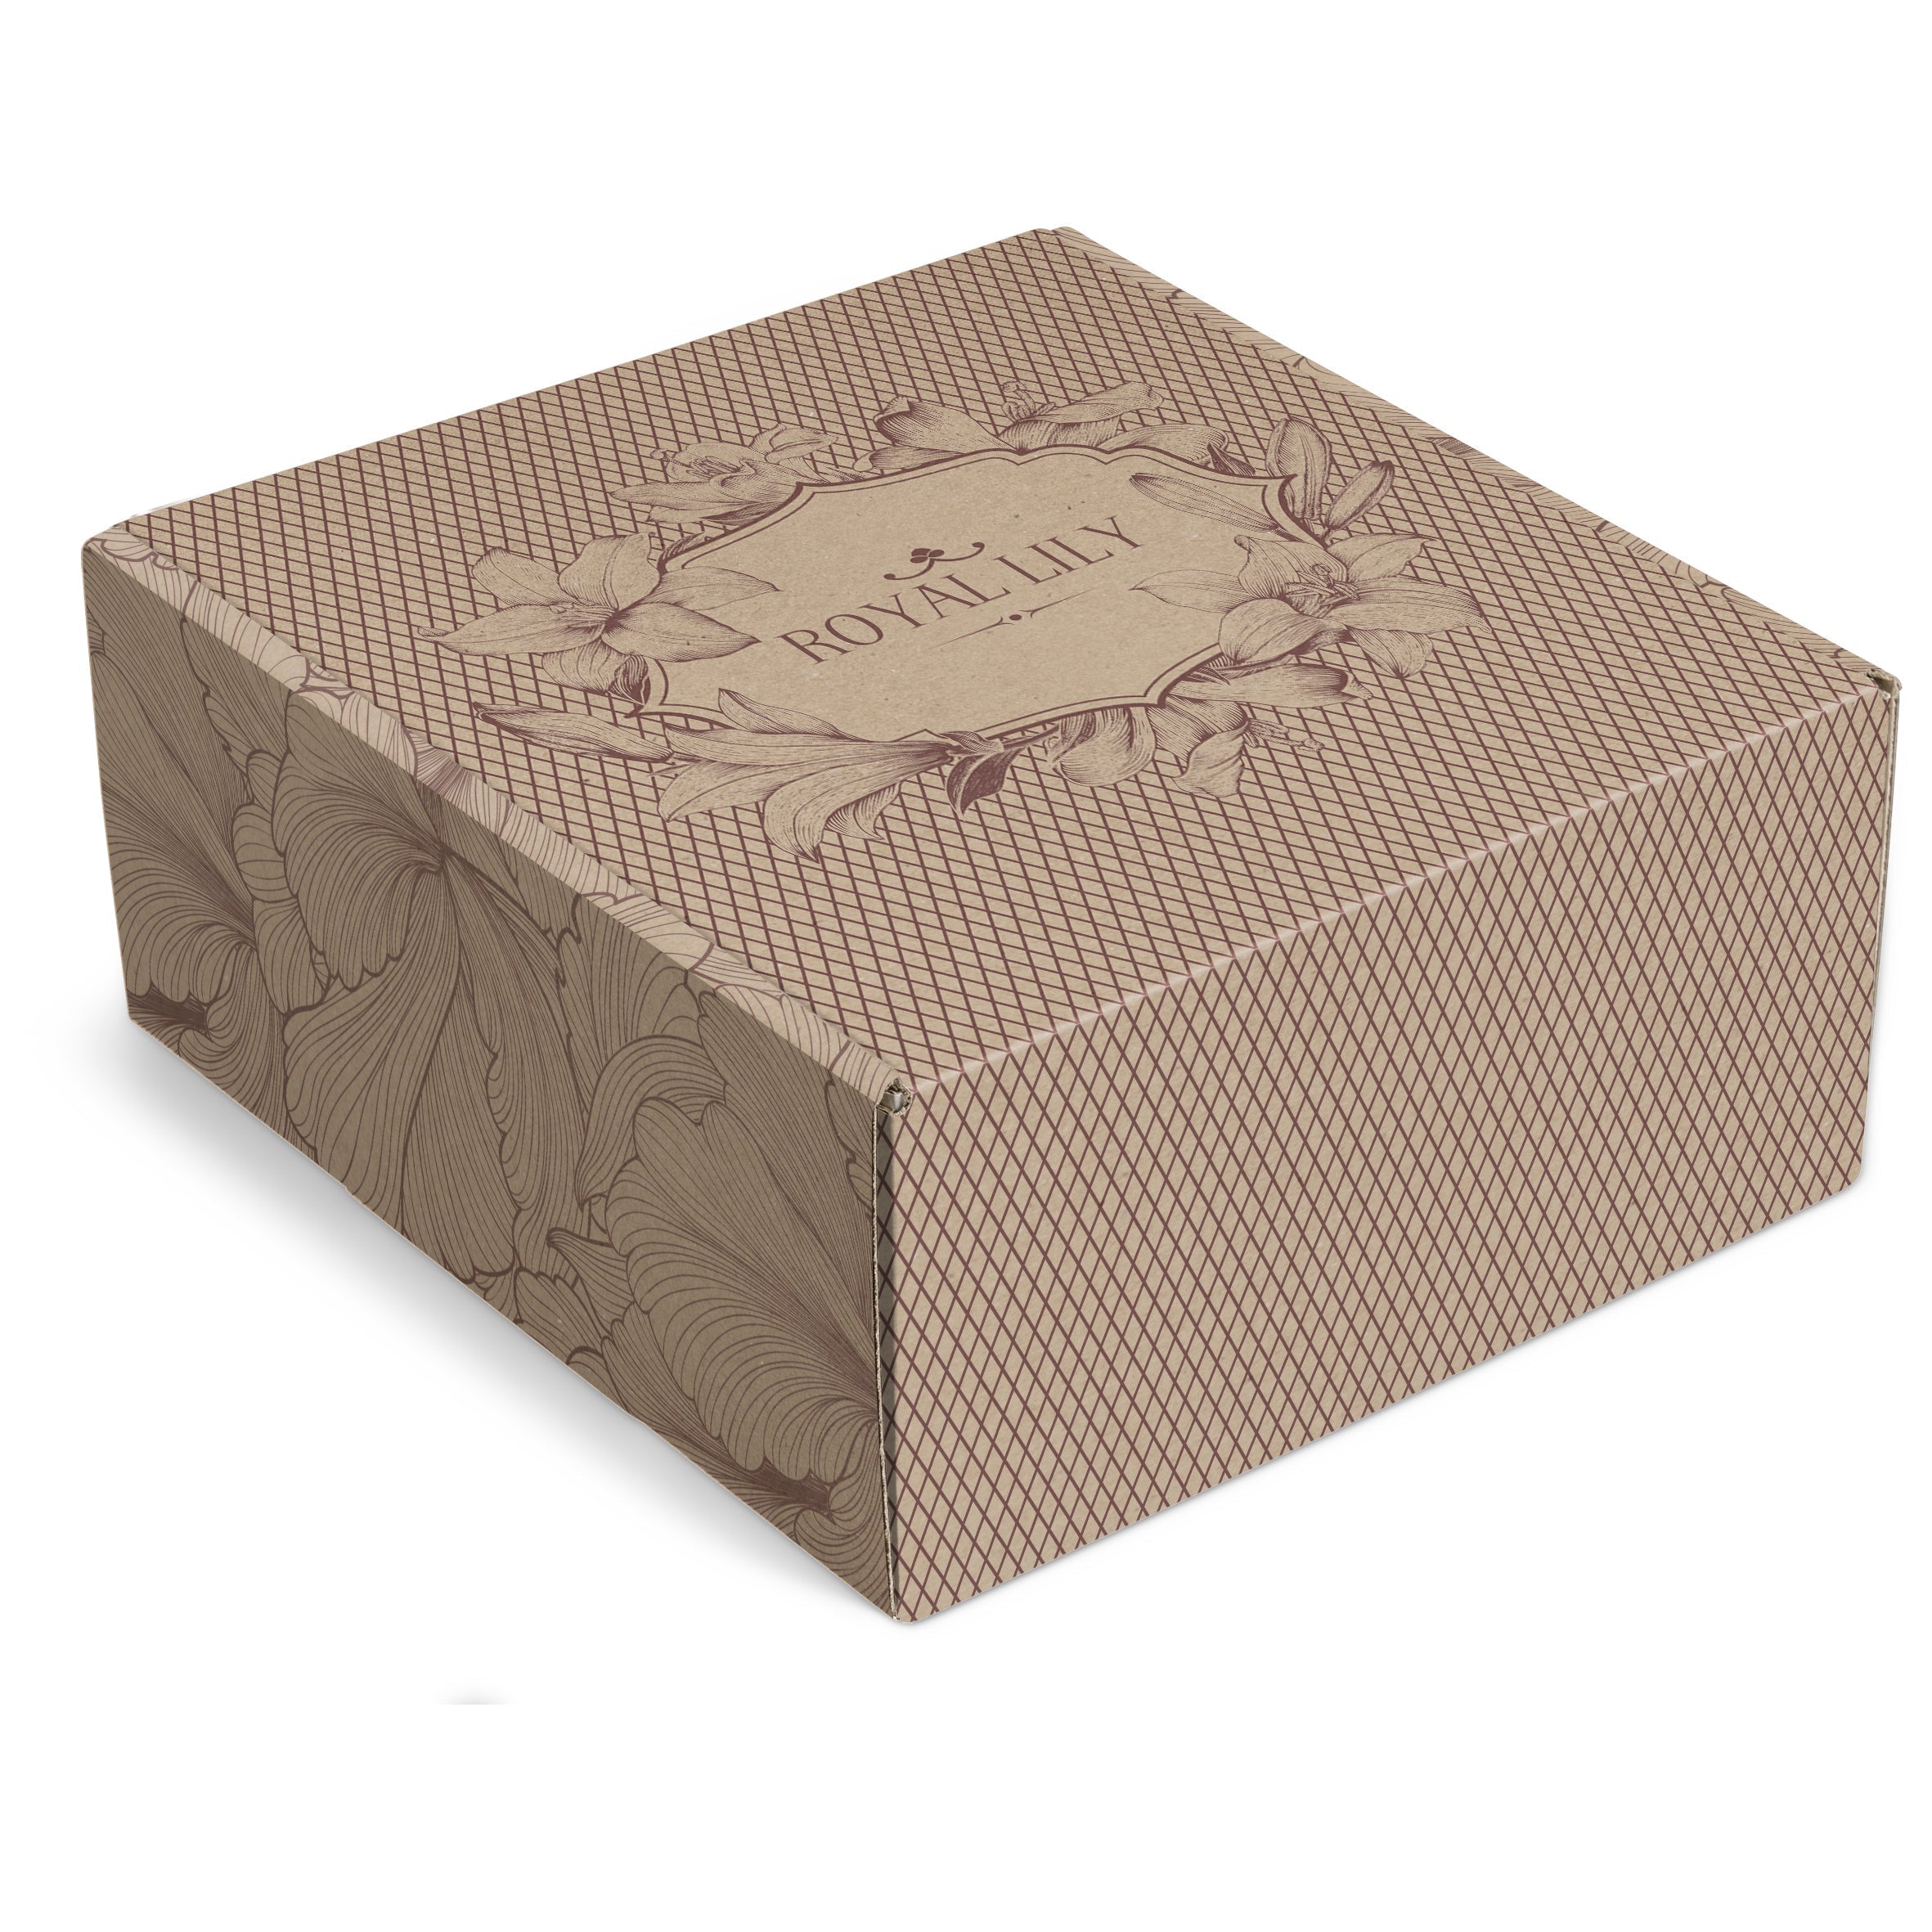 Corrugated cardboard gift box shown in a closed position and custom branded.